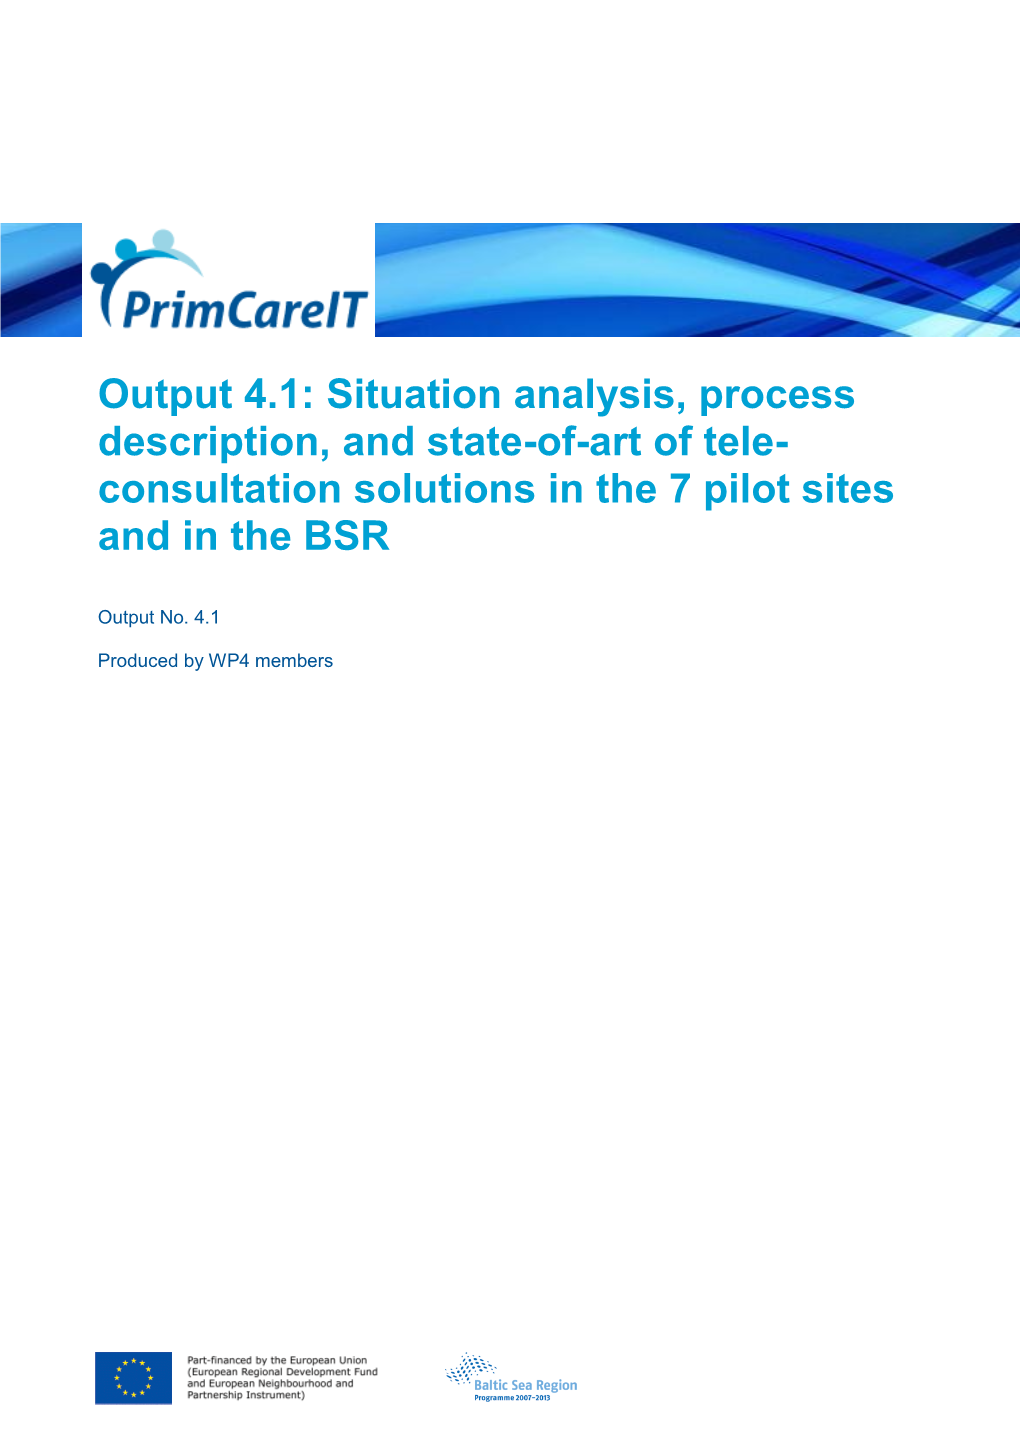 Situation Analysis, Process Description, and State-Of-Art of Tele- Consultation Solutions in the 7 Pilot Sites and in the BSR